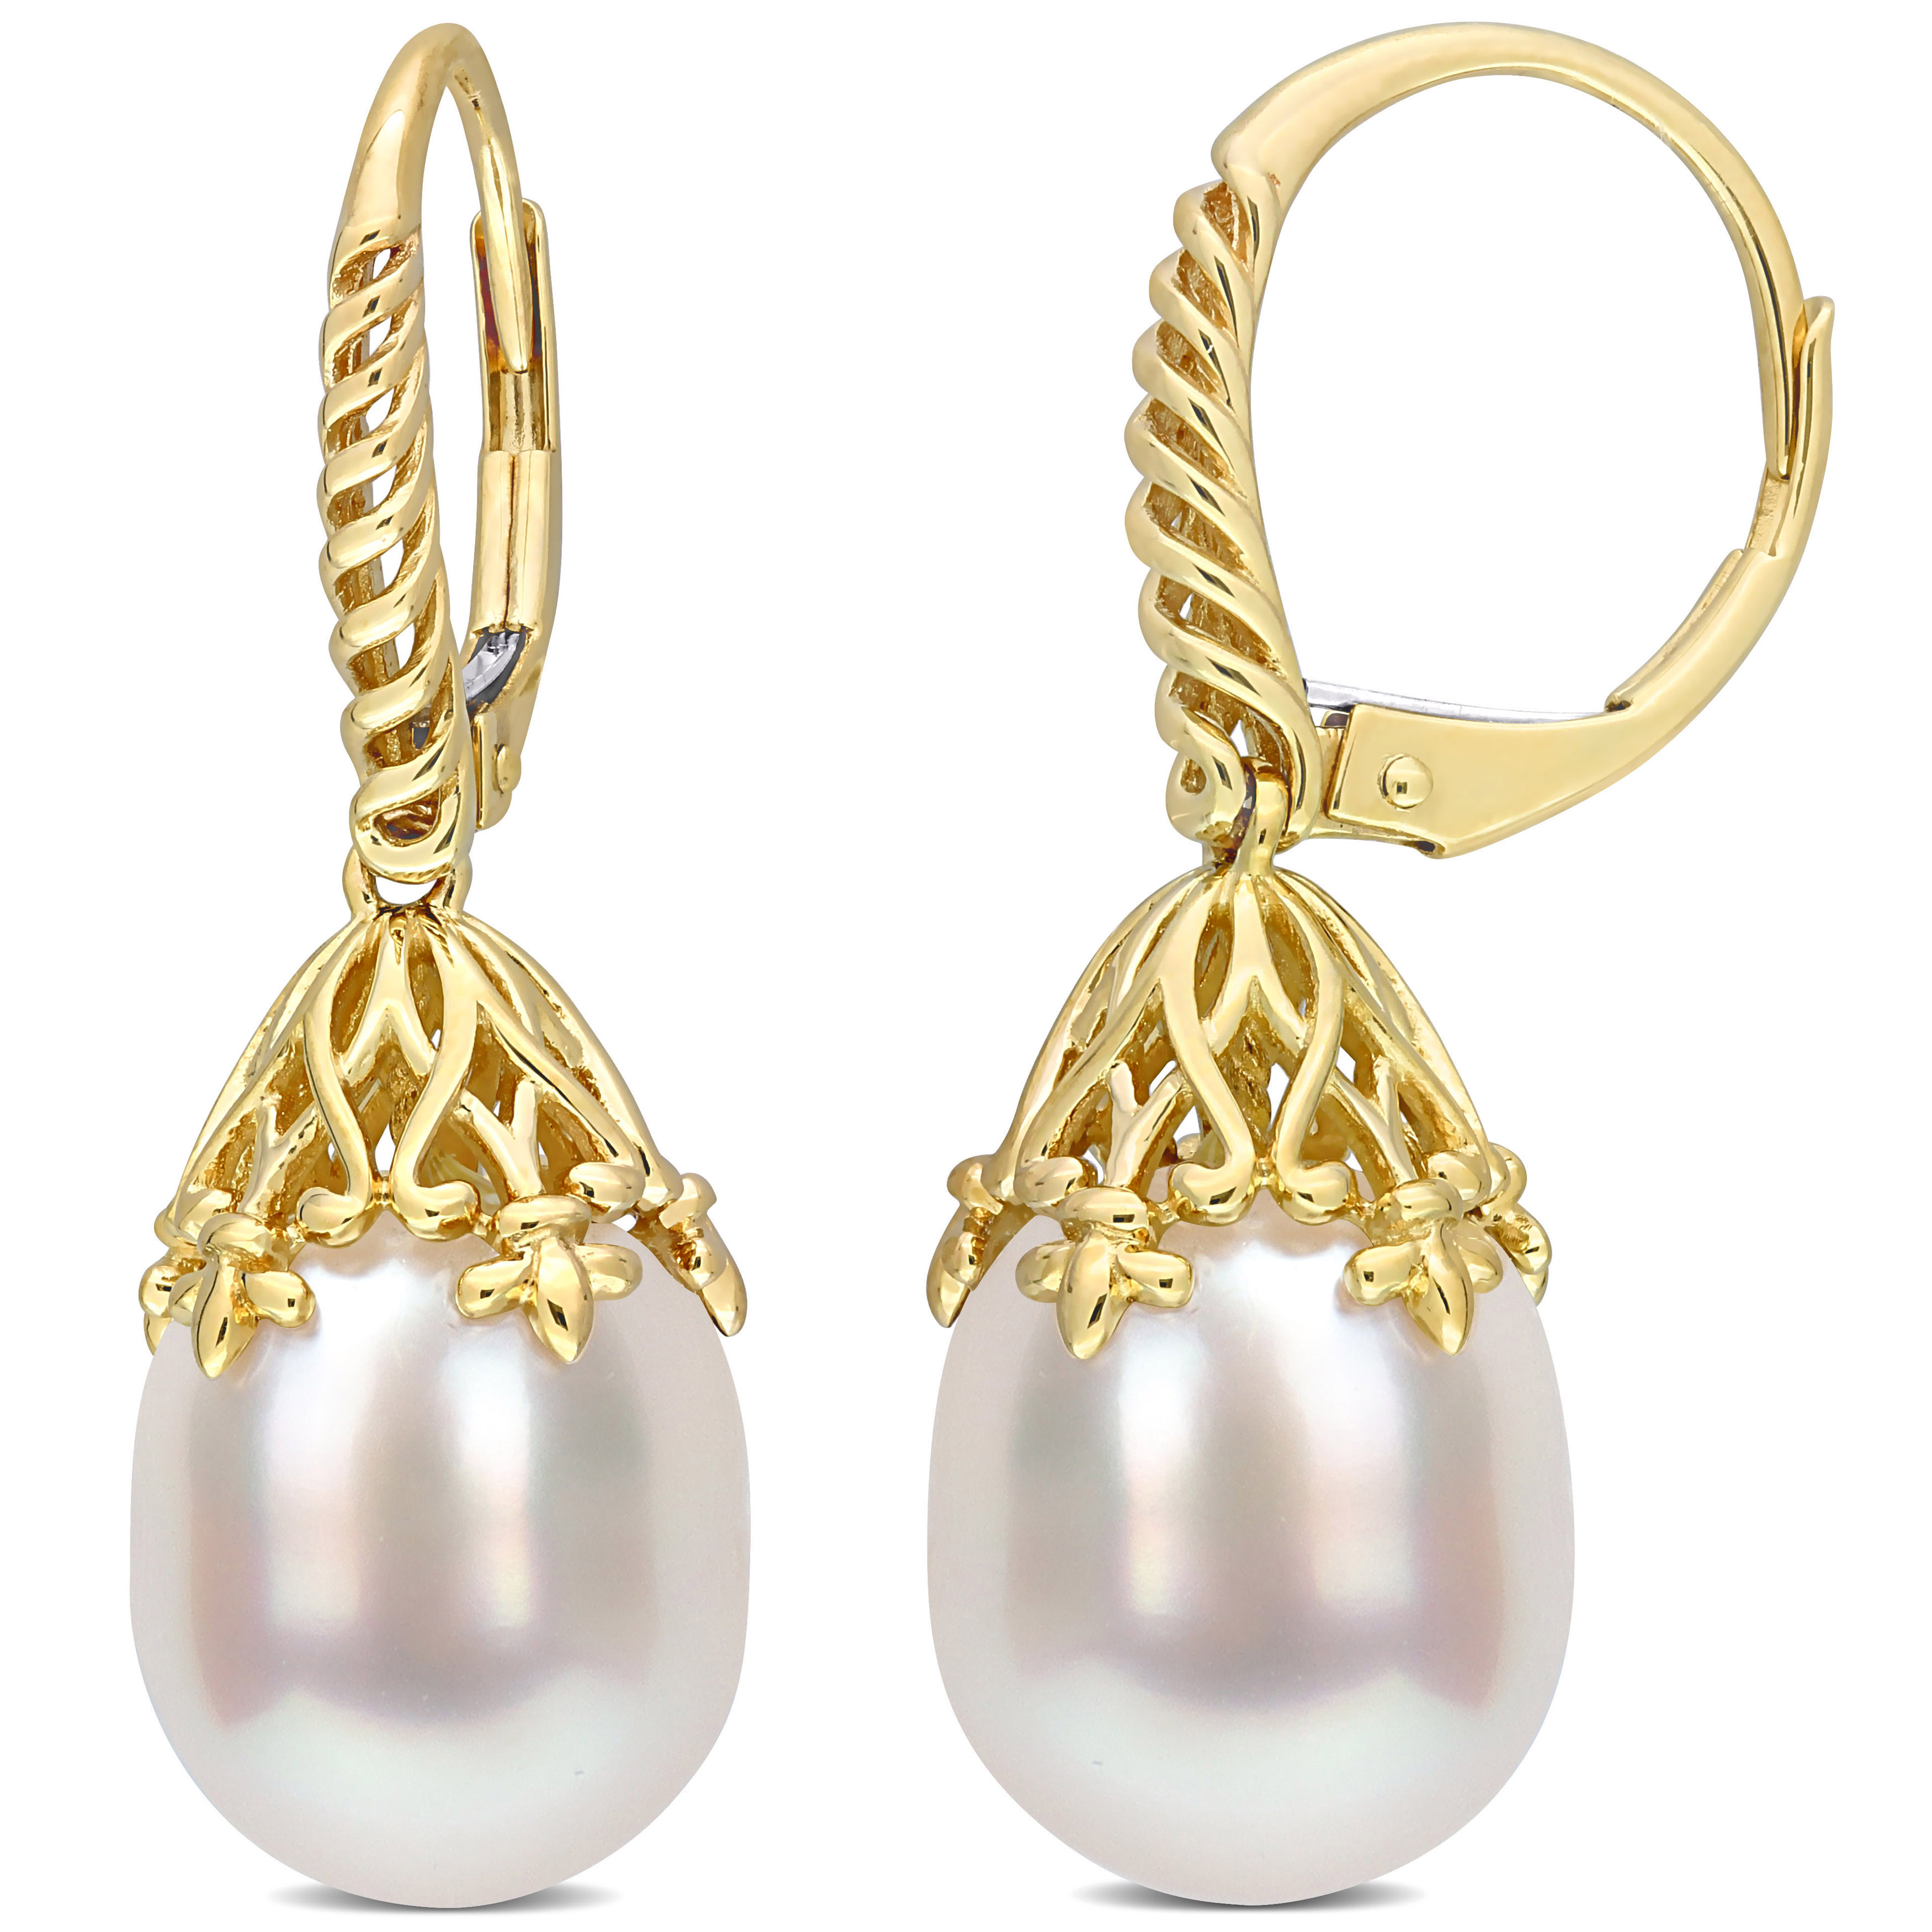 9-10 MM South Sea Cultured Pearl Filigree Leverback Earrings in 14k Yellow Gold